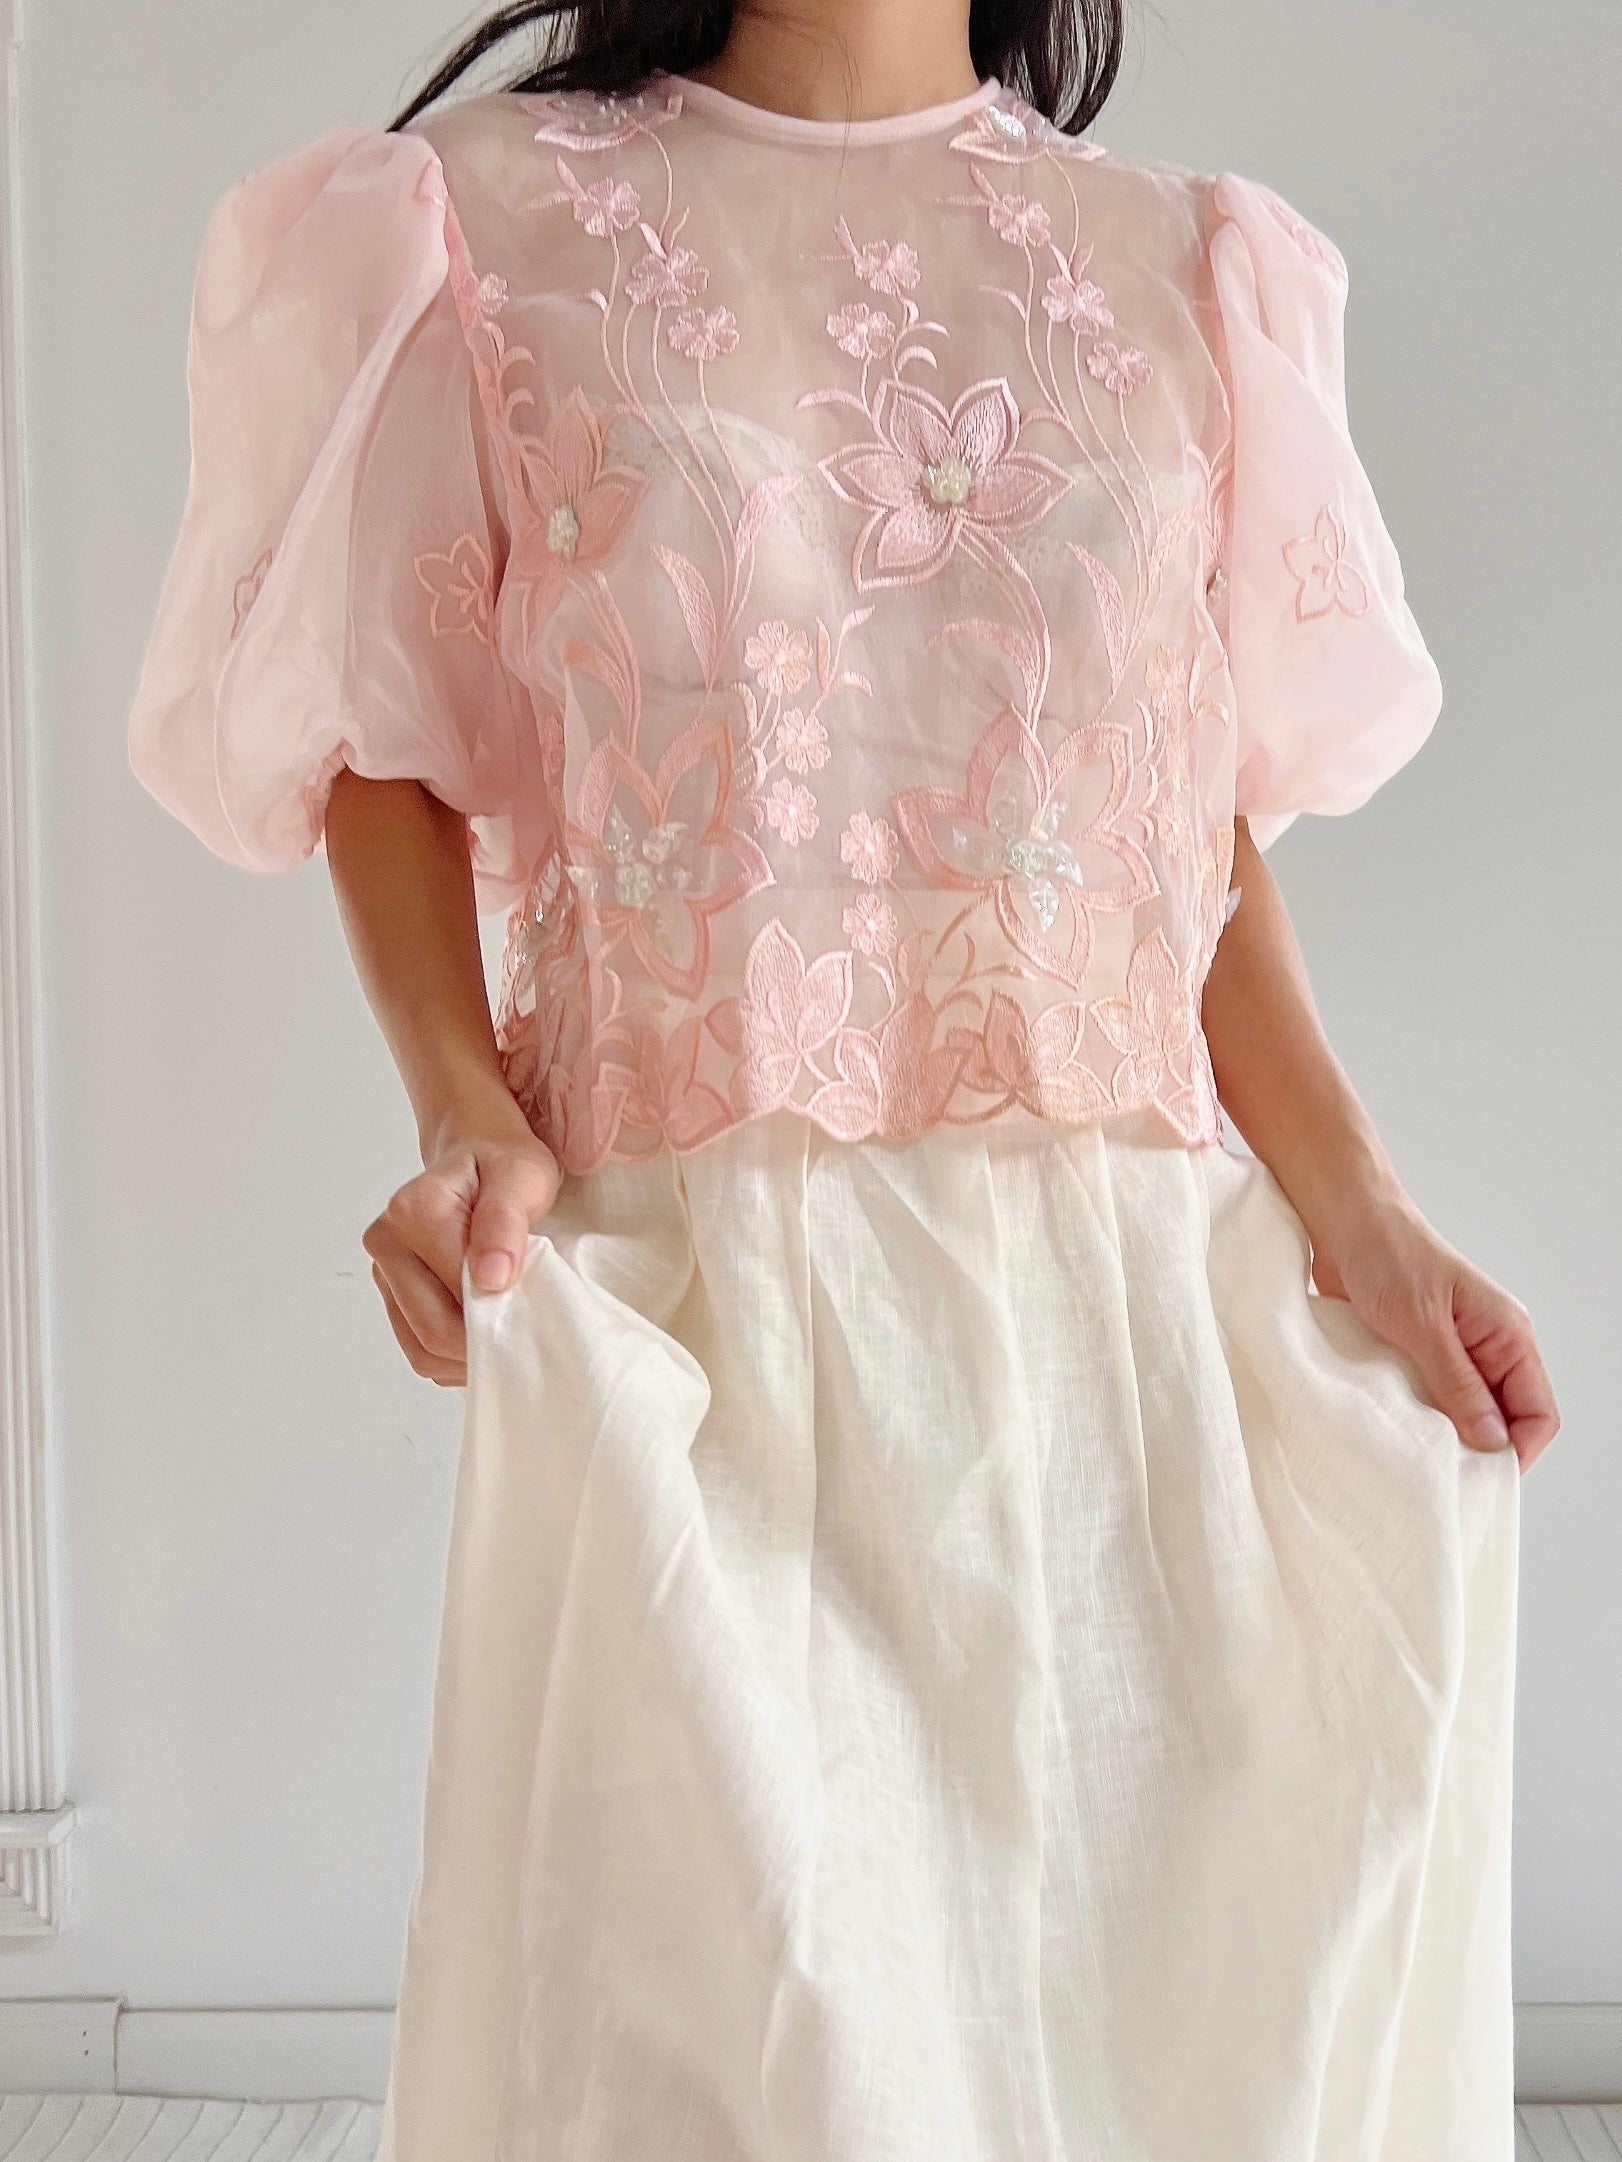 Vintage Voile Organza Embroidered Top - M